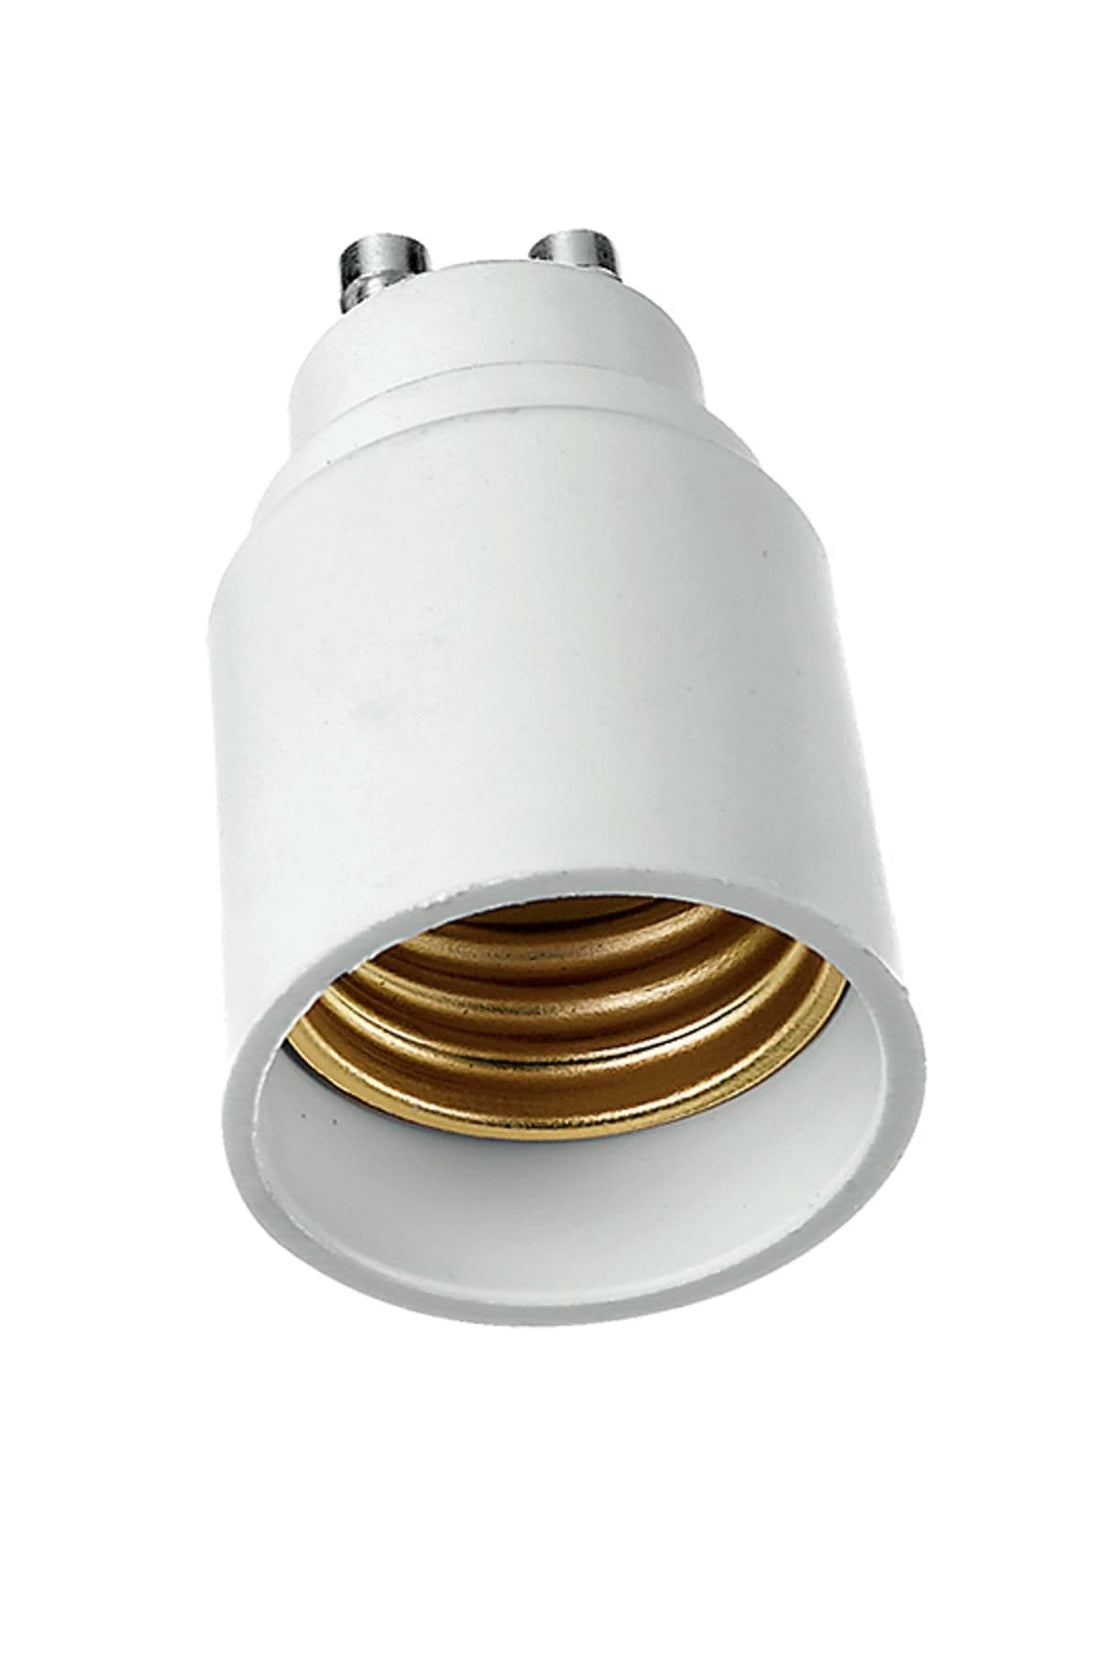 ADAPTER FOR GU10 TO E27 LAMPS - best price from Maltashopper.com BR420000237